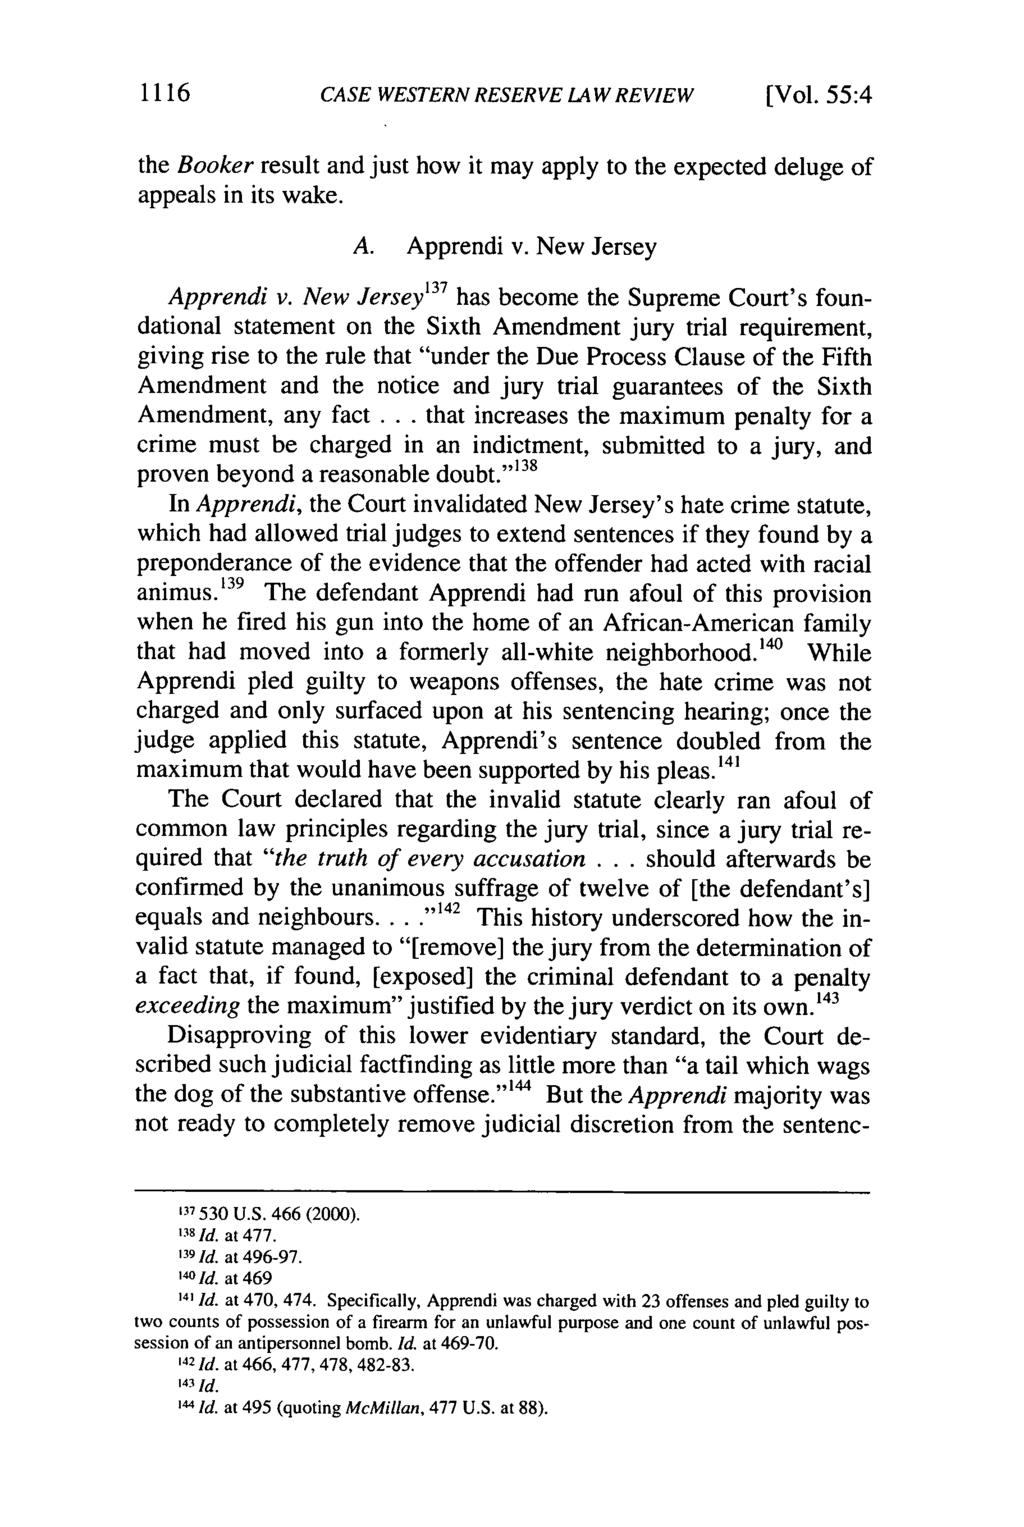 1116 CASE WESTERN RESERVE LAW REVIEW (Vol. 55:4 the Booker result and just how it may apply to the expected deluge of appeals in its wake. A. Apprendi v. New Jersey Apprendi v.